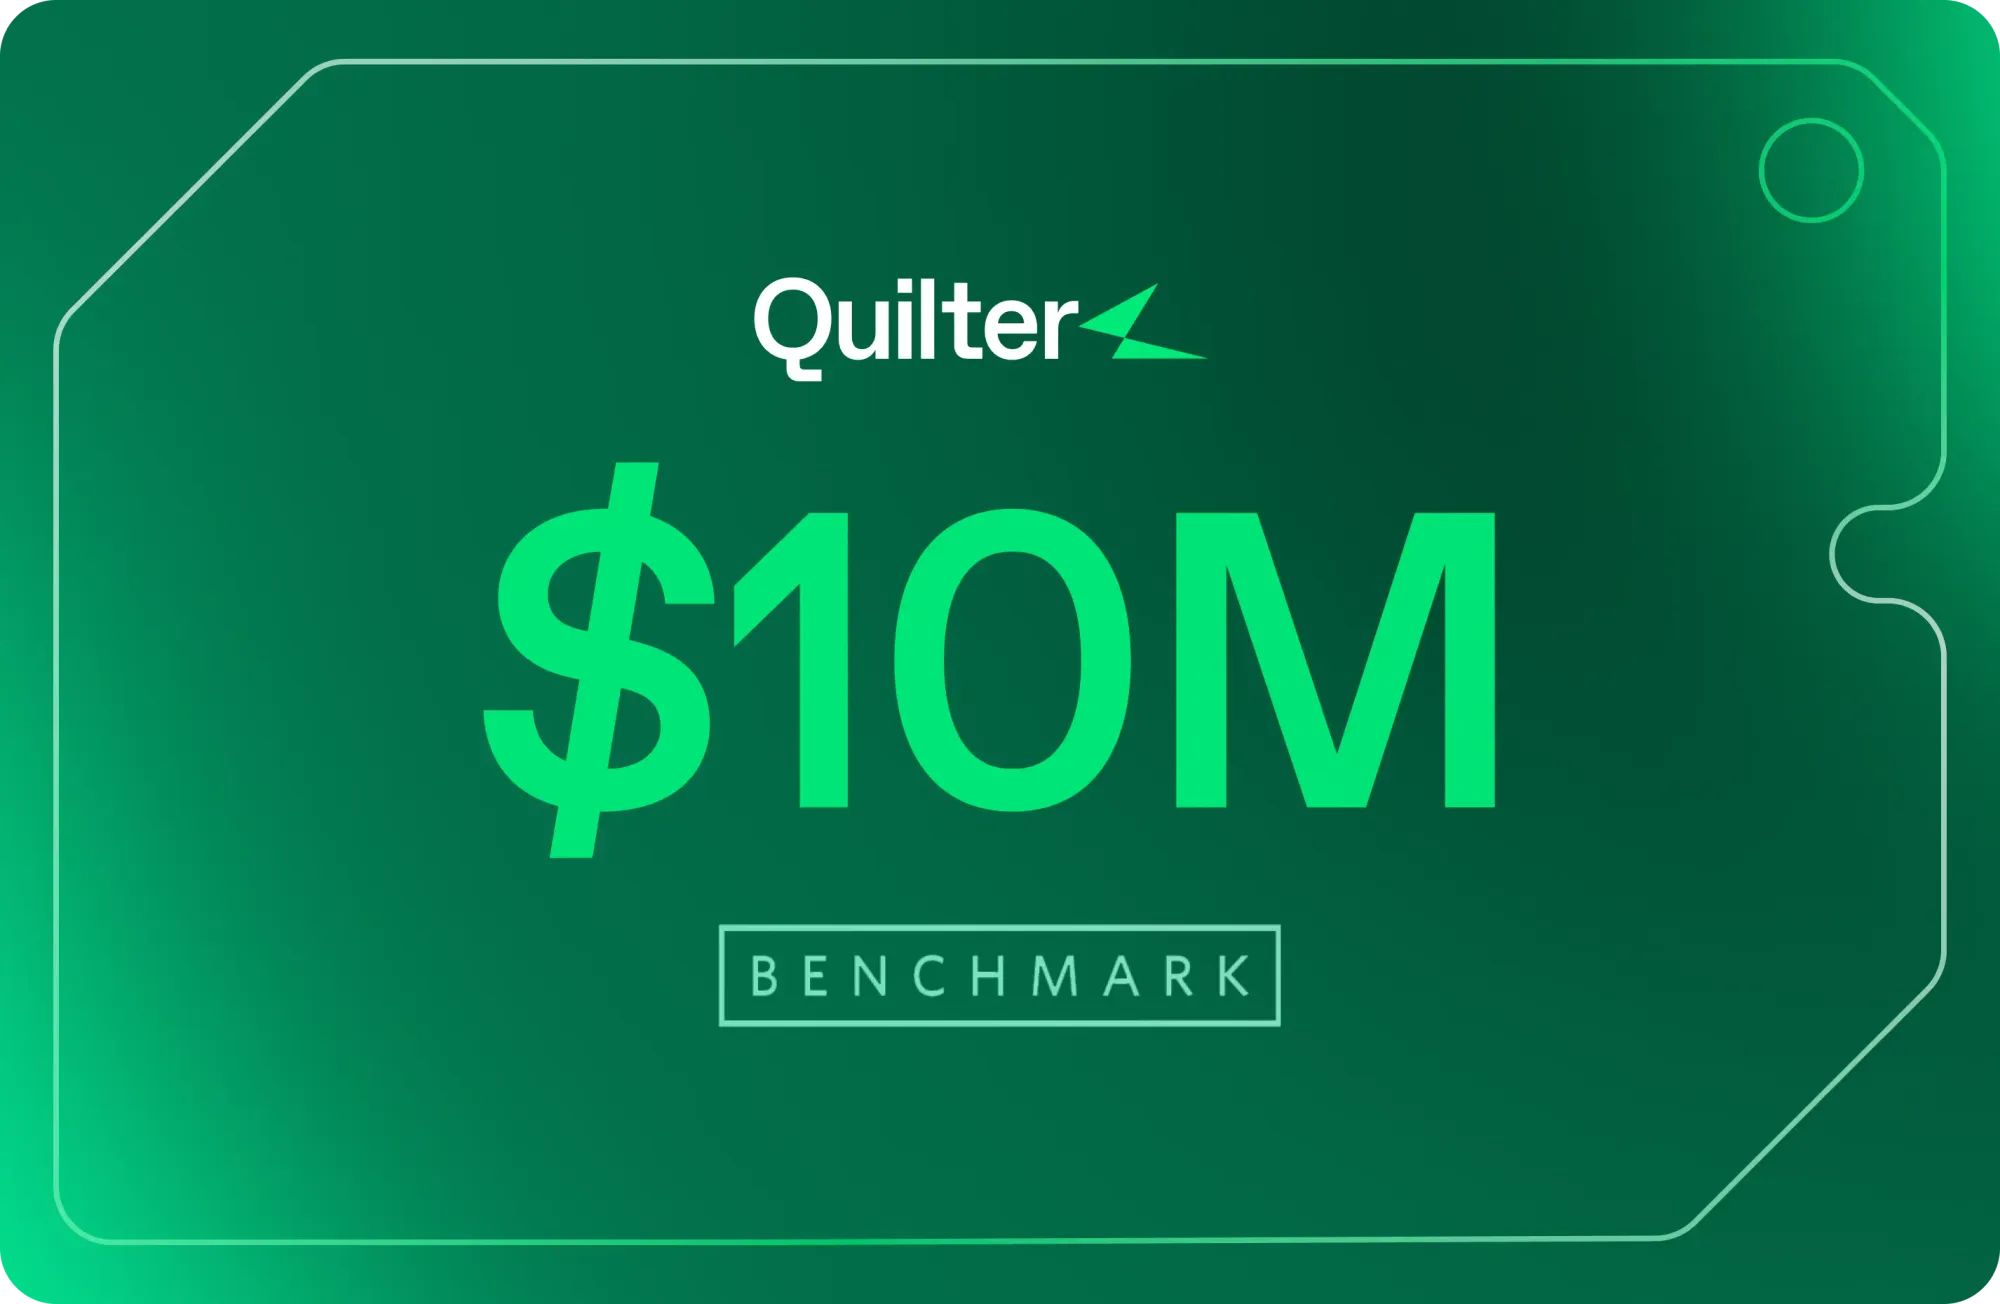 Quilter raises $10M to build the "compiler" for circuit boards